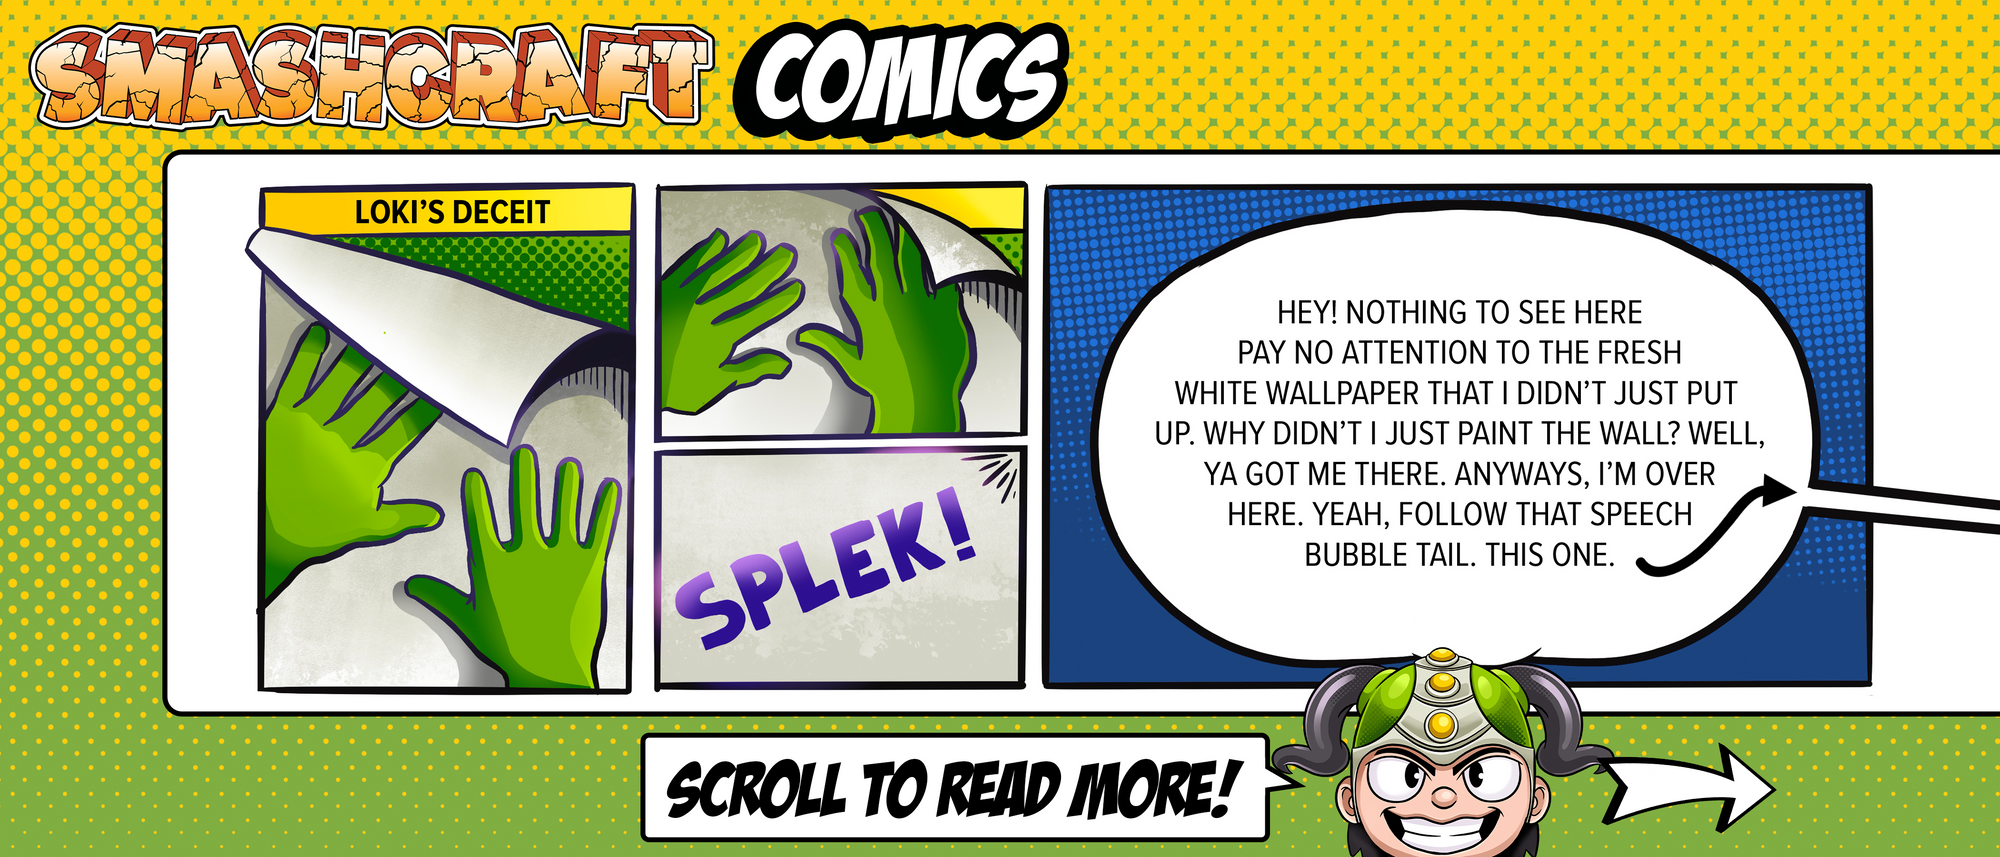 Comic strip showing Loki's hands placing white wallpaper over text titled "Loki's deceit" & text bubble stating to follow the speech bubble tail because he is "over here".